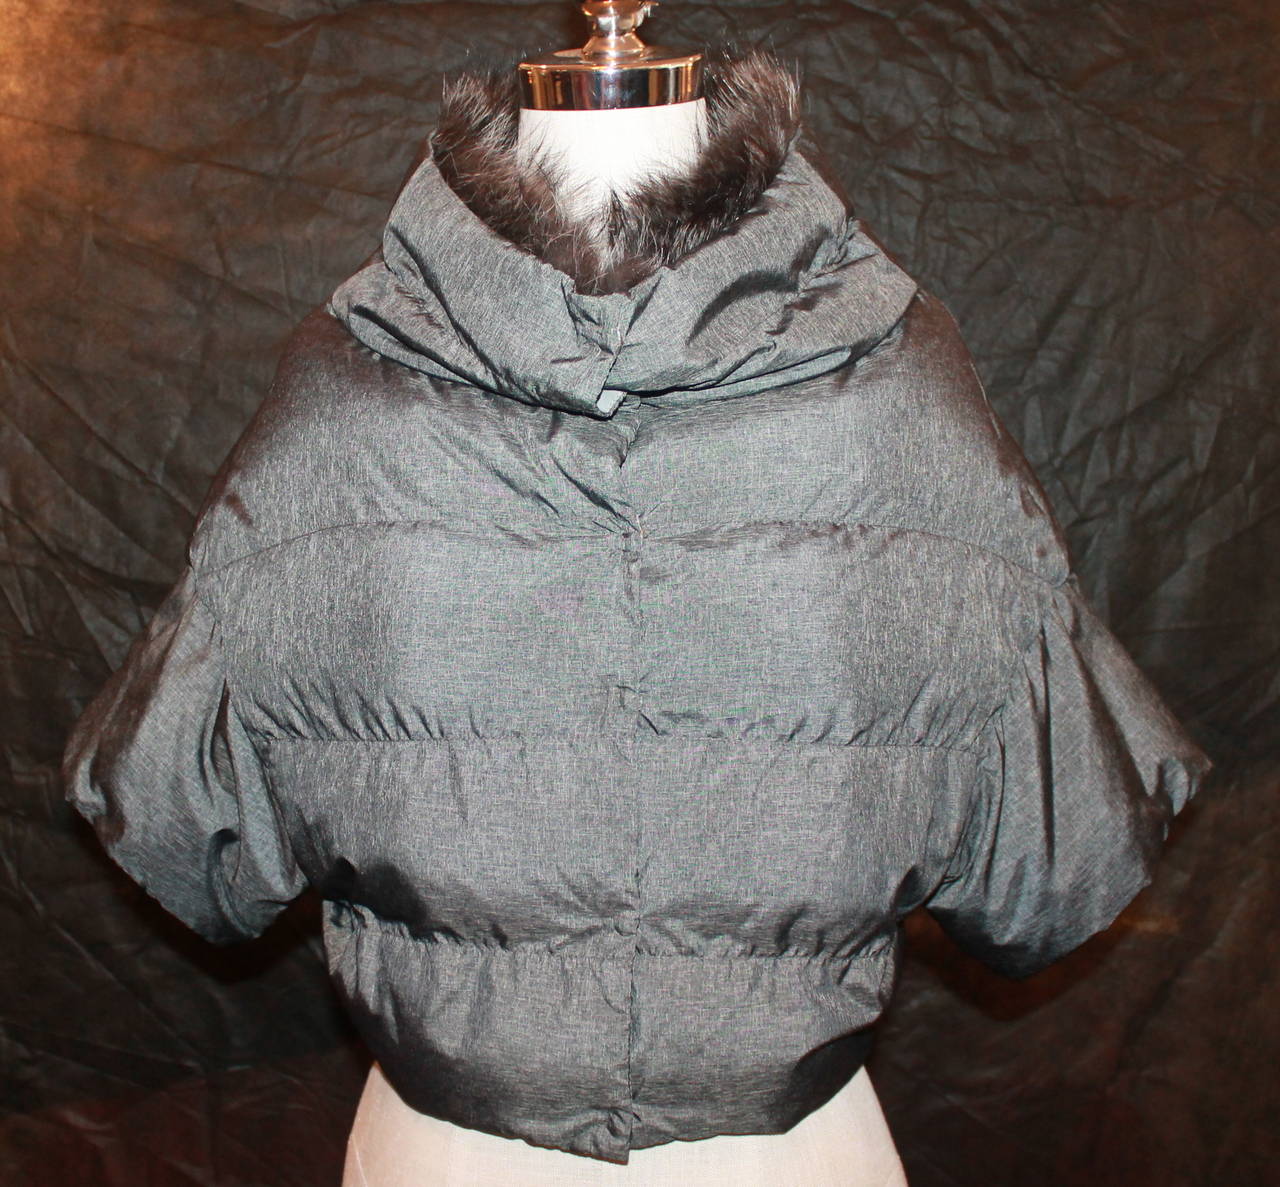 Brunello Cucinelli Charcoal Cropped Short Sleeve Puffer Jacket with Fur - S. This jacket is in excellent condition with little wear. The seam of the shoulder runs very long in accordance with the jacket's style. 

Measurements:
Bust- 34